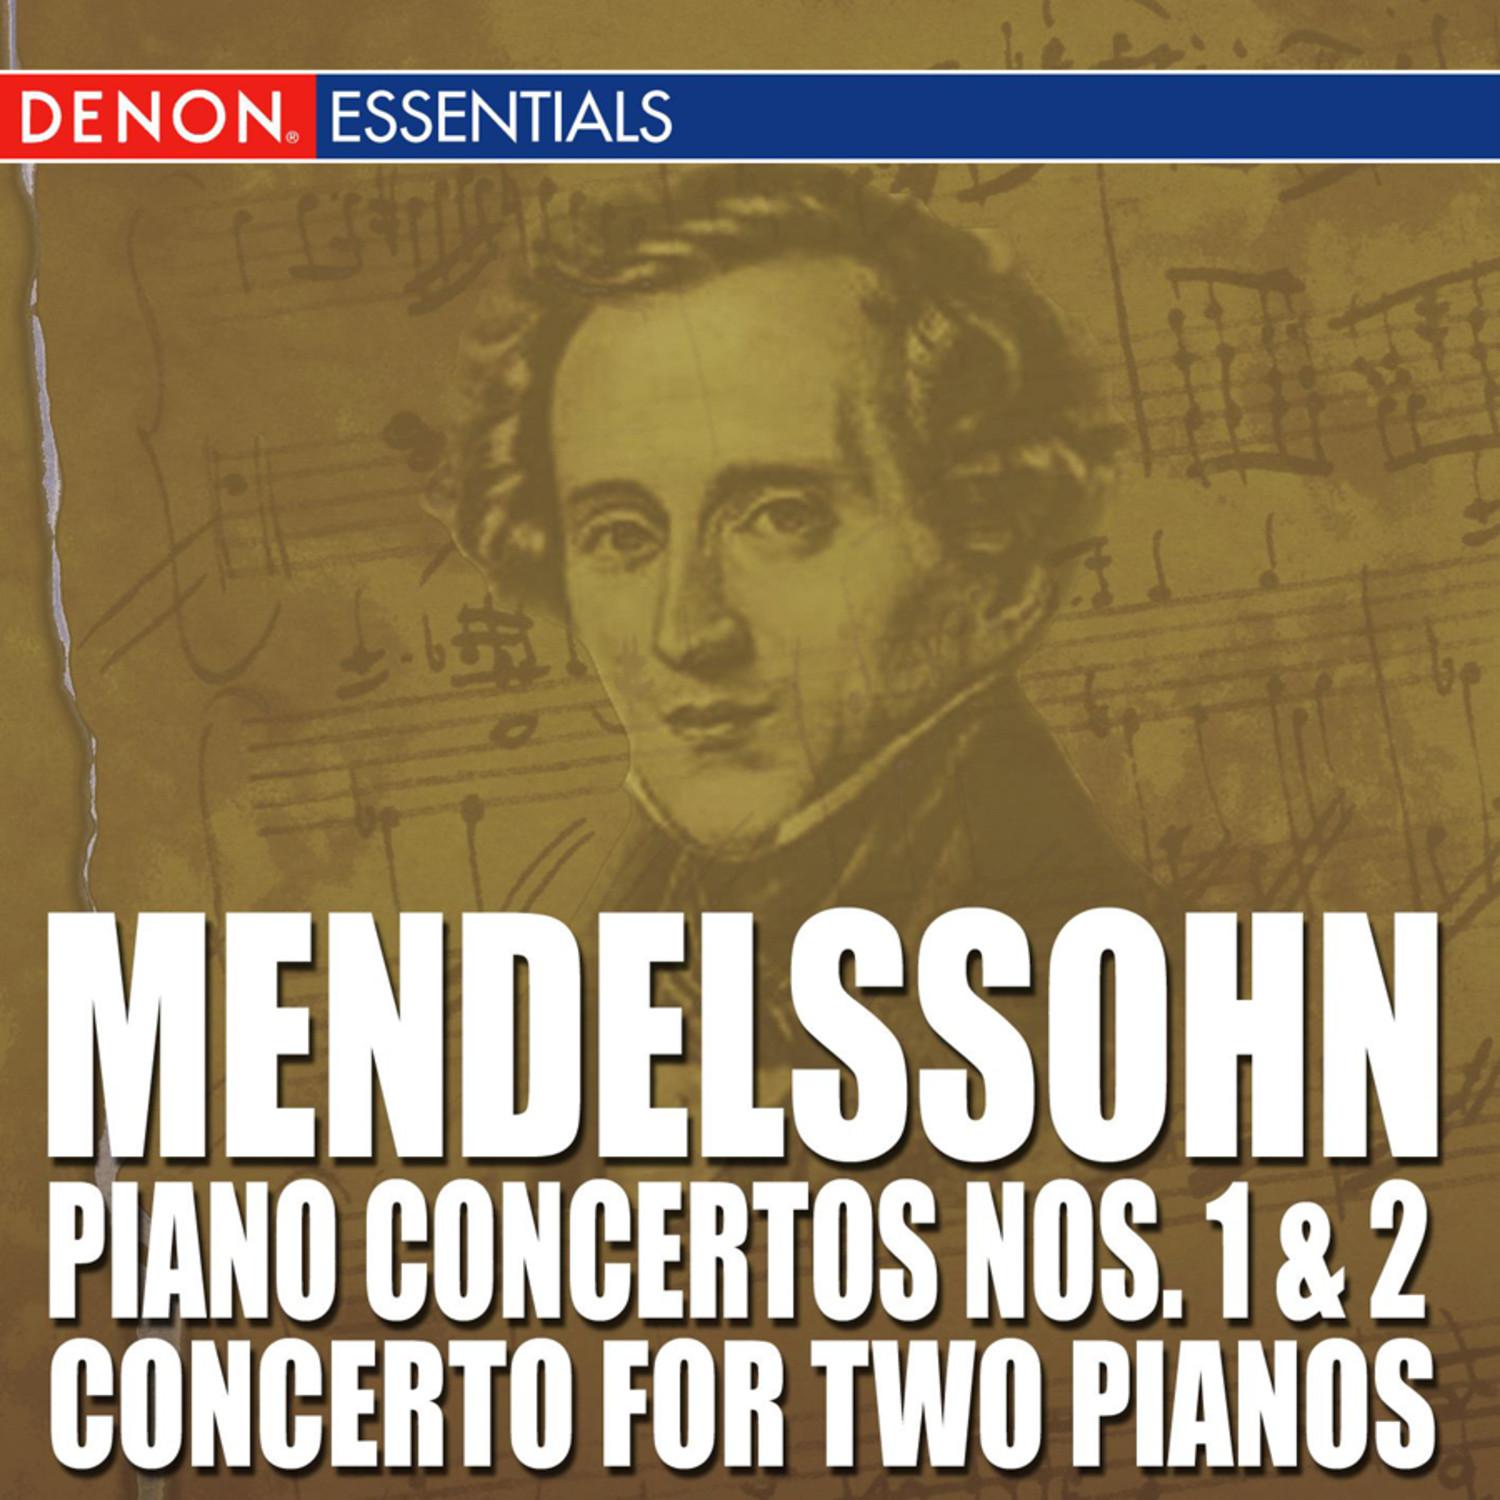 Concerto for Piano and Orchestra No. 1, Op. 25 in G Minor: II. Andante